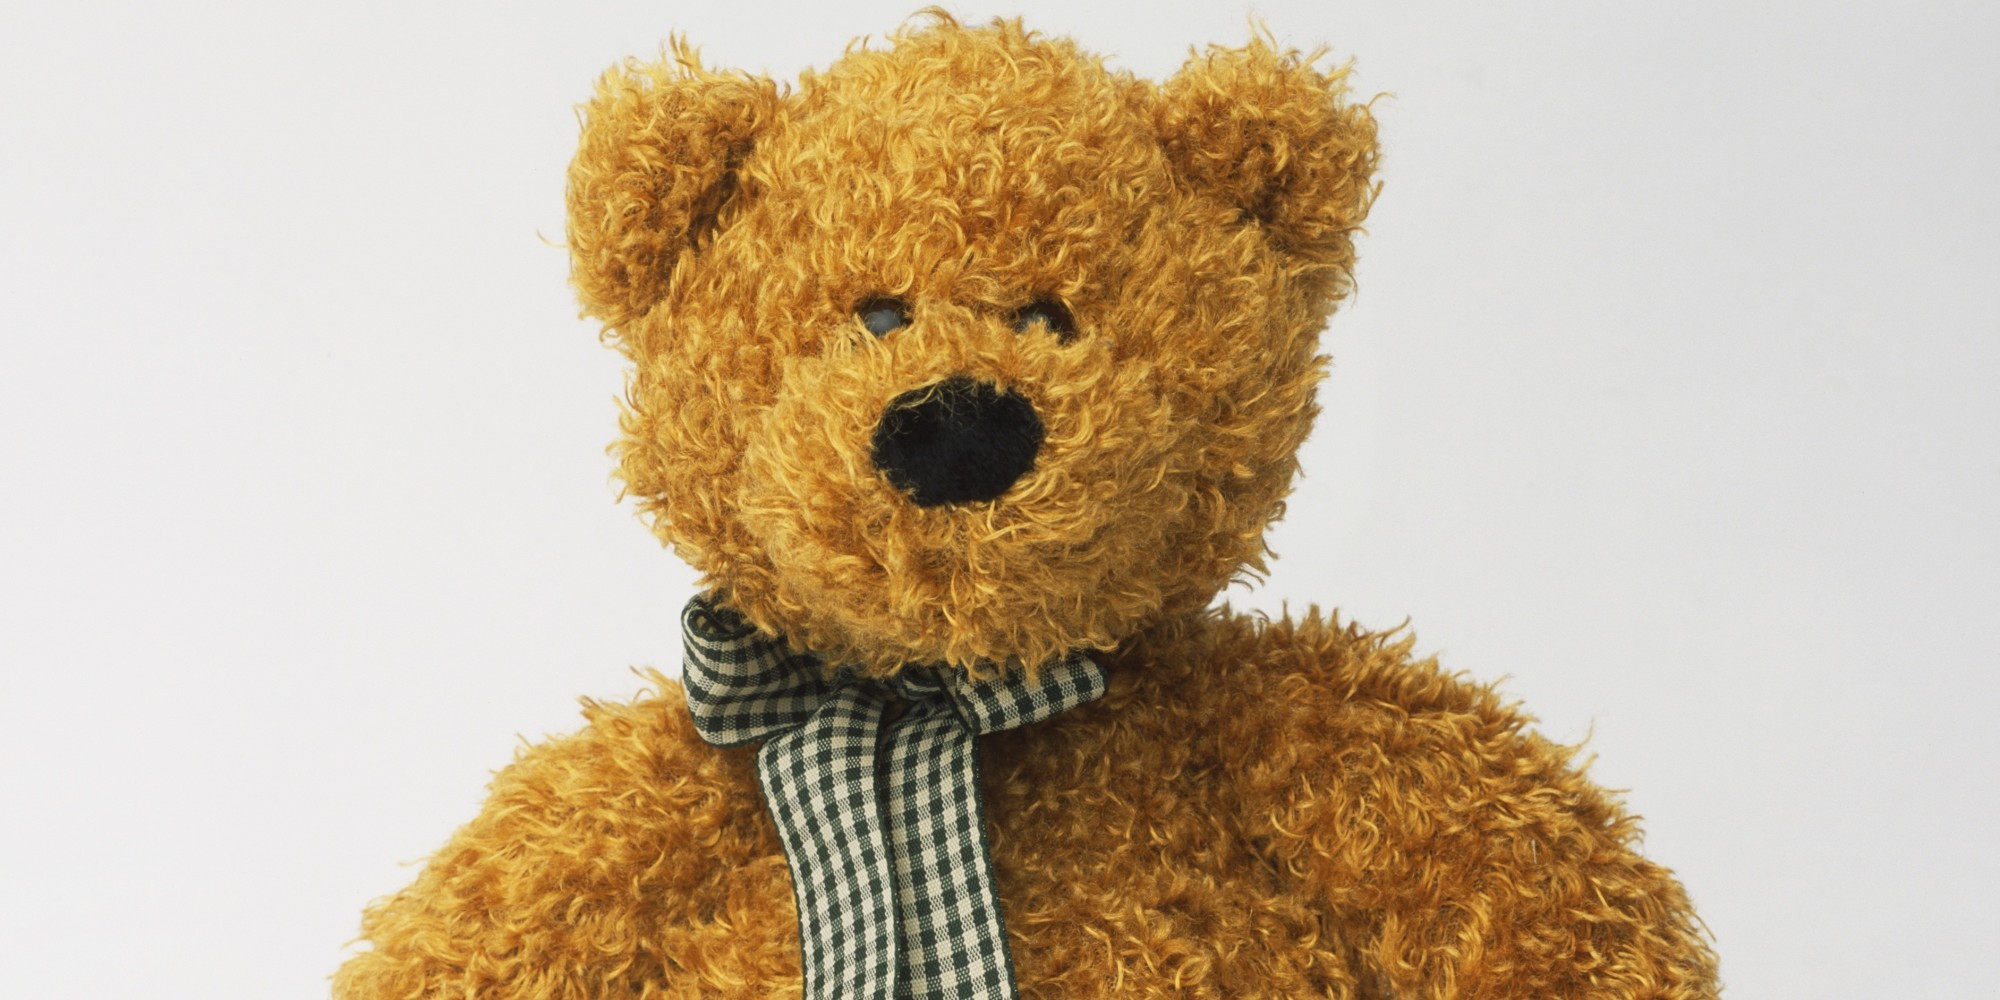 Gps In Teddy Bear Helps Cops Catch Alleged Thief Huffpost 